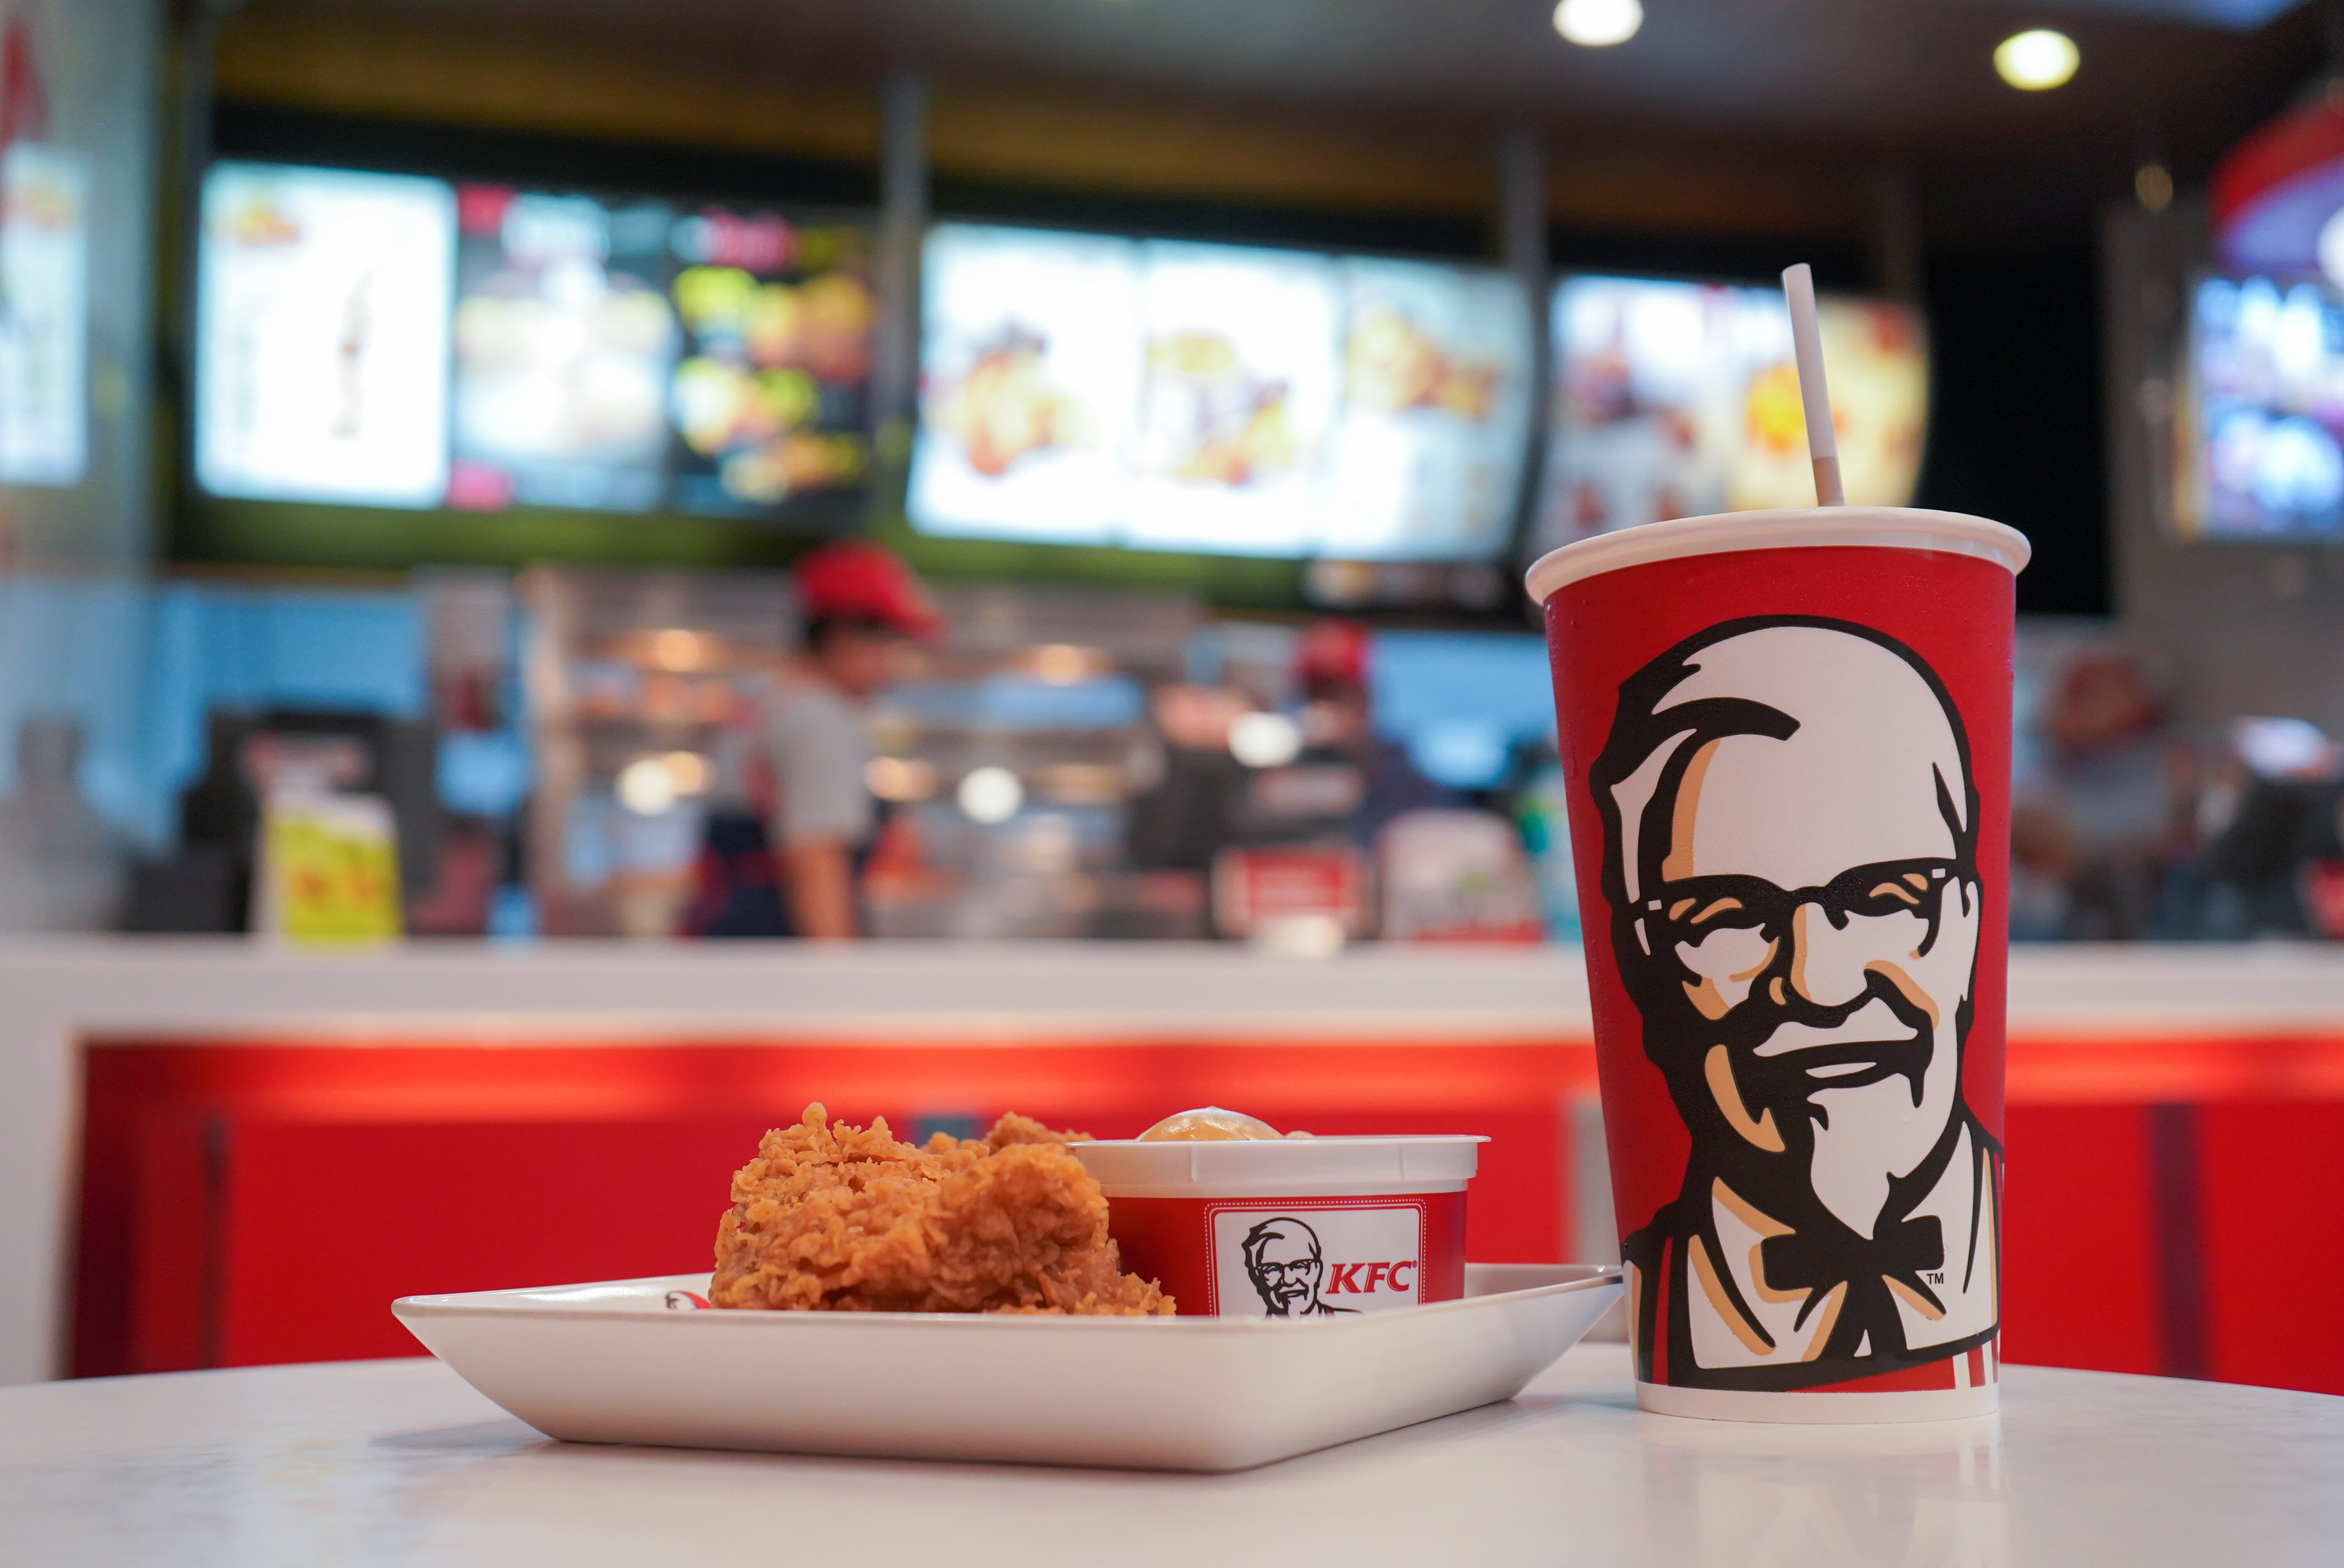 KFC hatches recruitment scheme to hire 6,000 disadvantaged young people